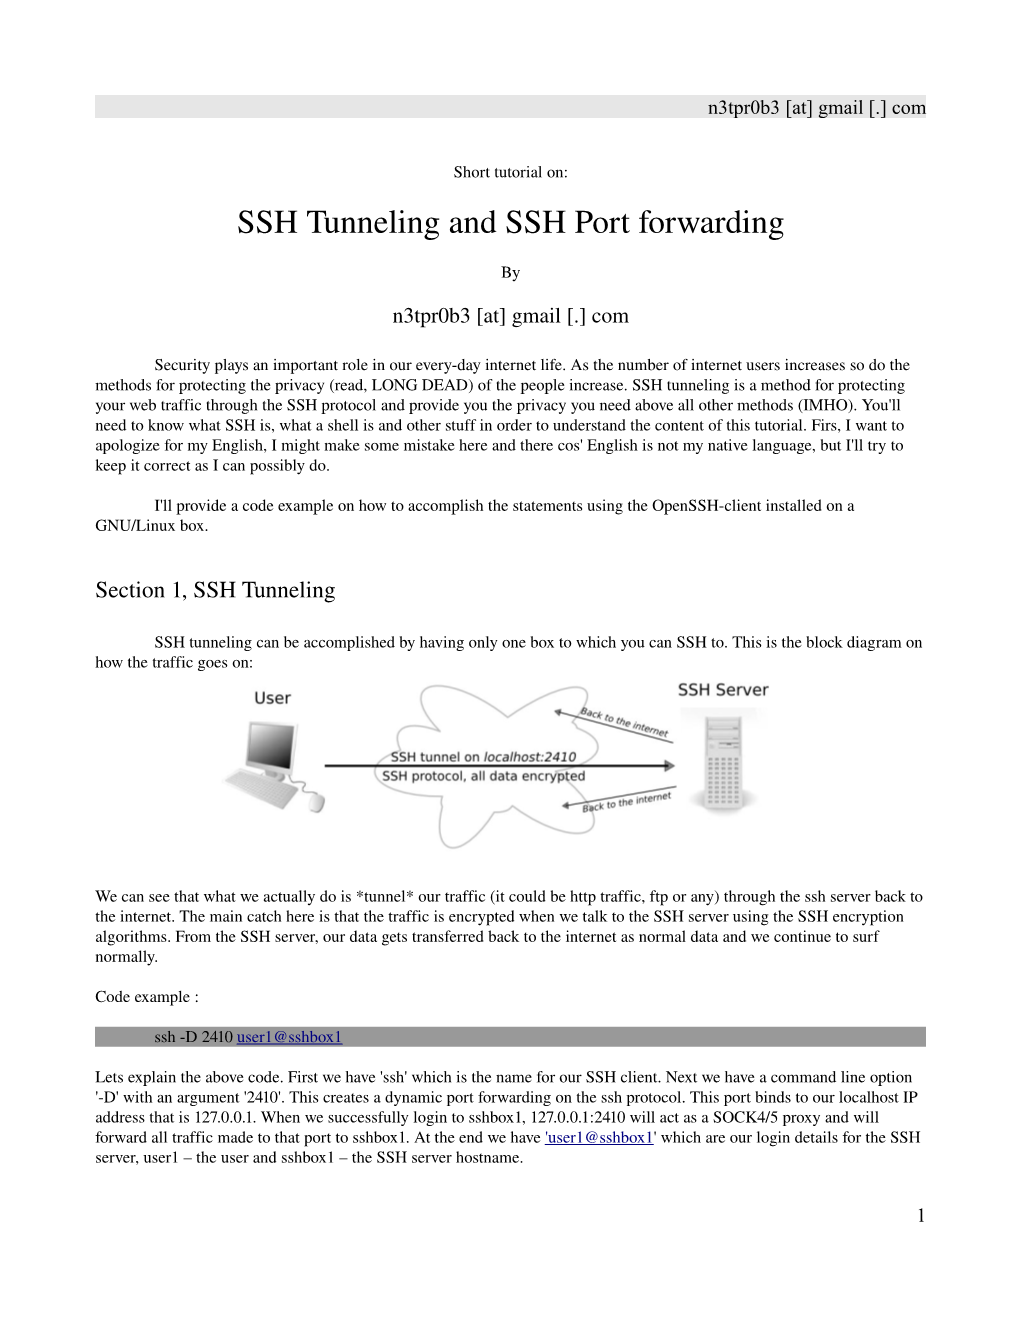 SSH Tunneling and SSH Port Forwarding